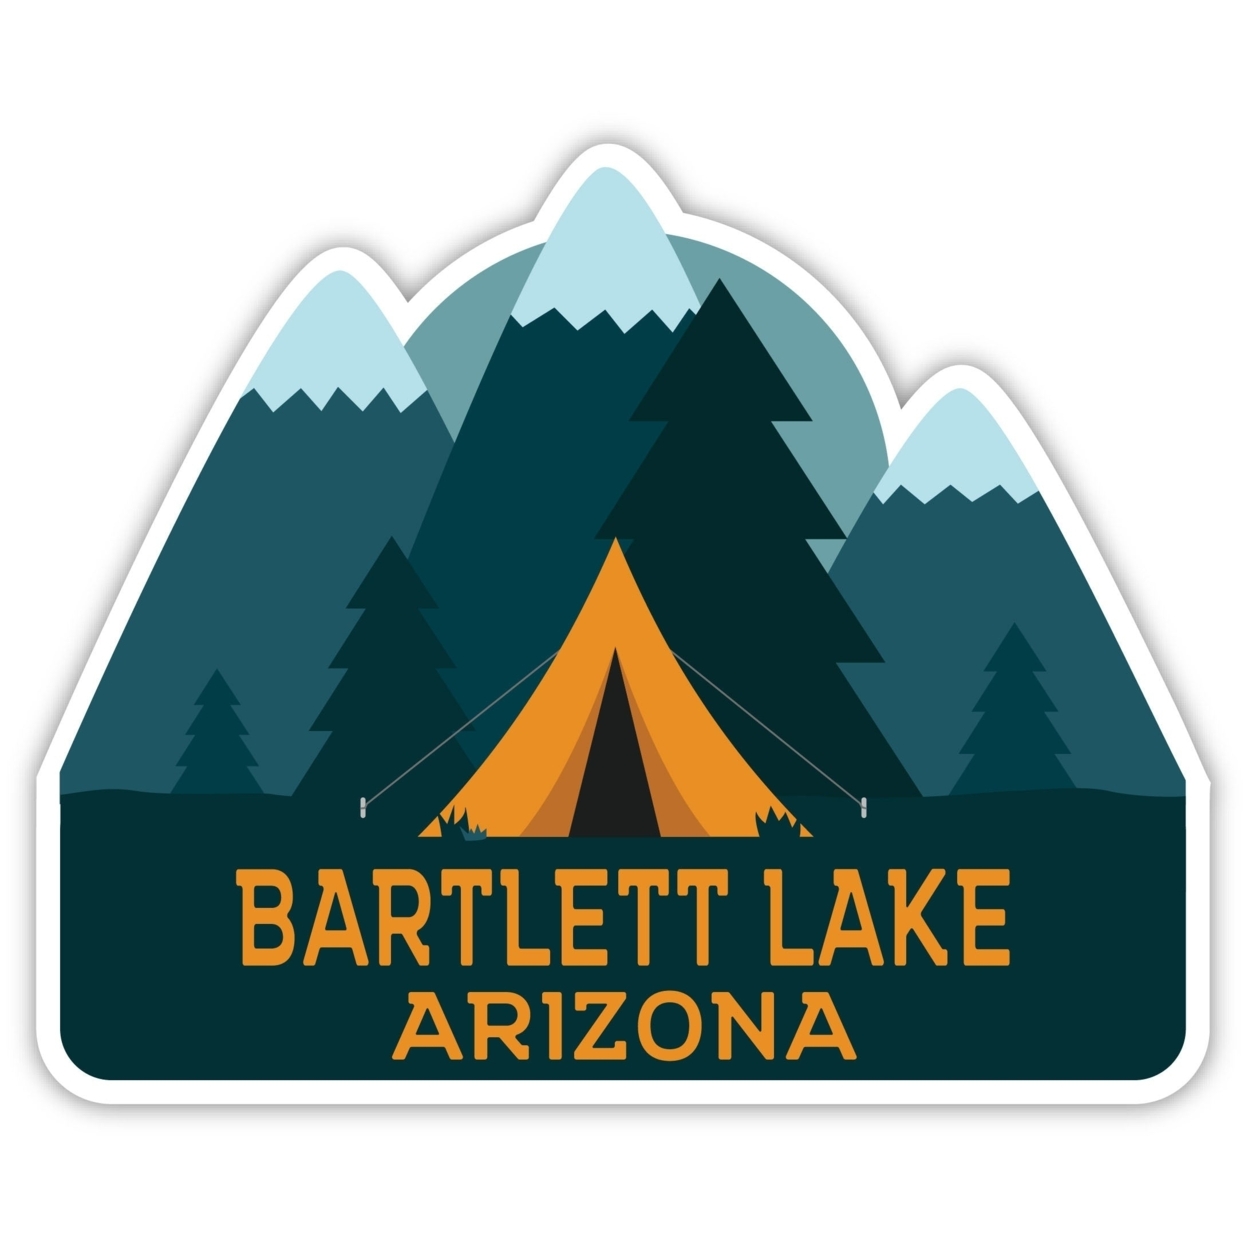 Bartlett Lake Arizona Souvenir Decorative Stickers (Choose Theme And Size) - 4-Pack, 6-Inch, Great Outdoors